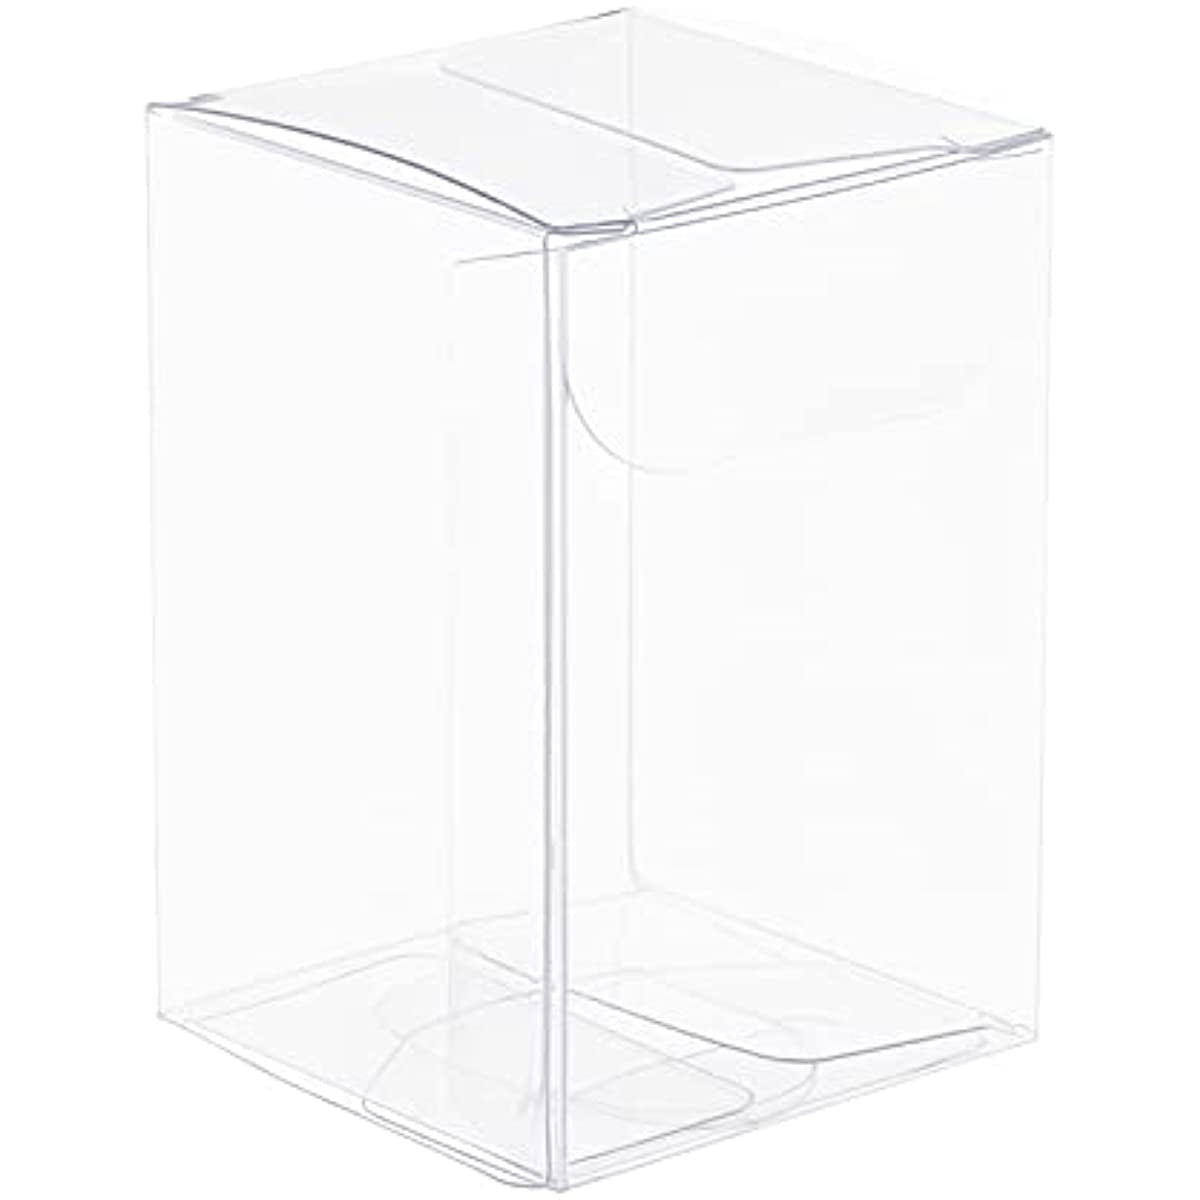 30-Pack Clear Gift Boxes - 5x5x5 In Square Plastic Transparent Favor Boxes  for Wedding, Baby Shower, Birthday Party